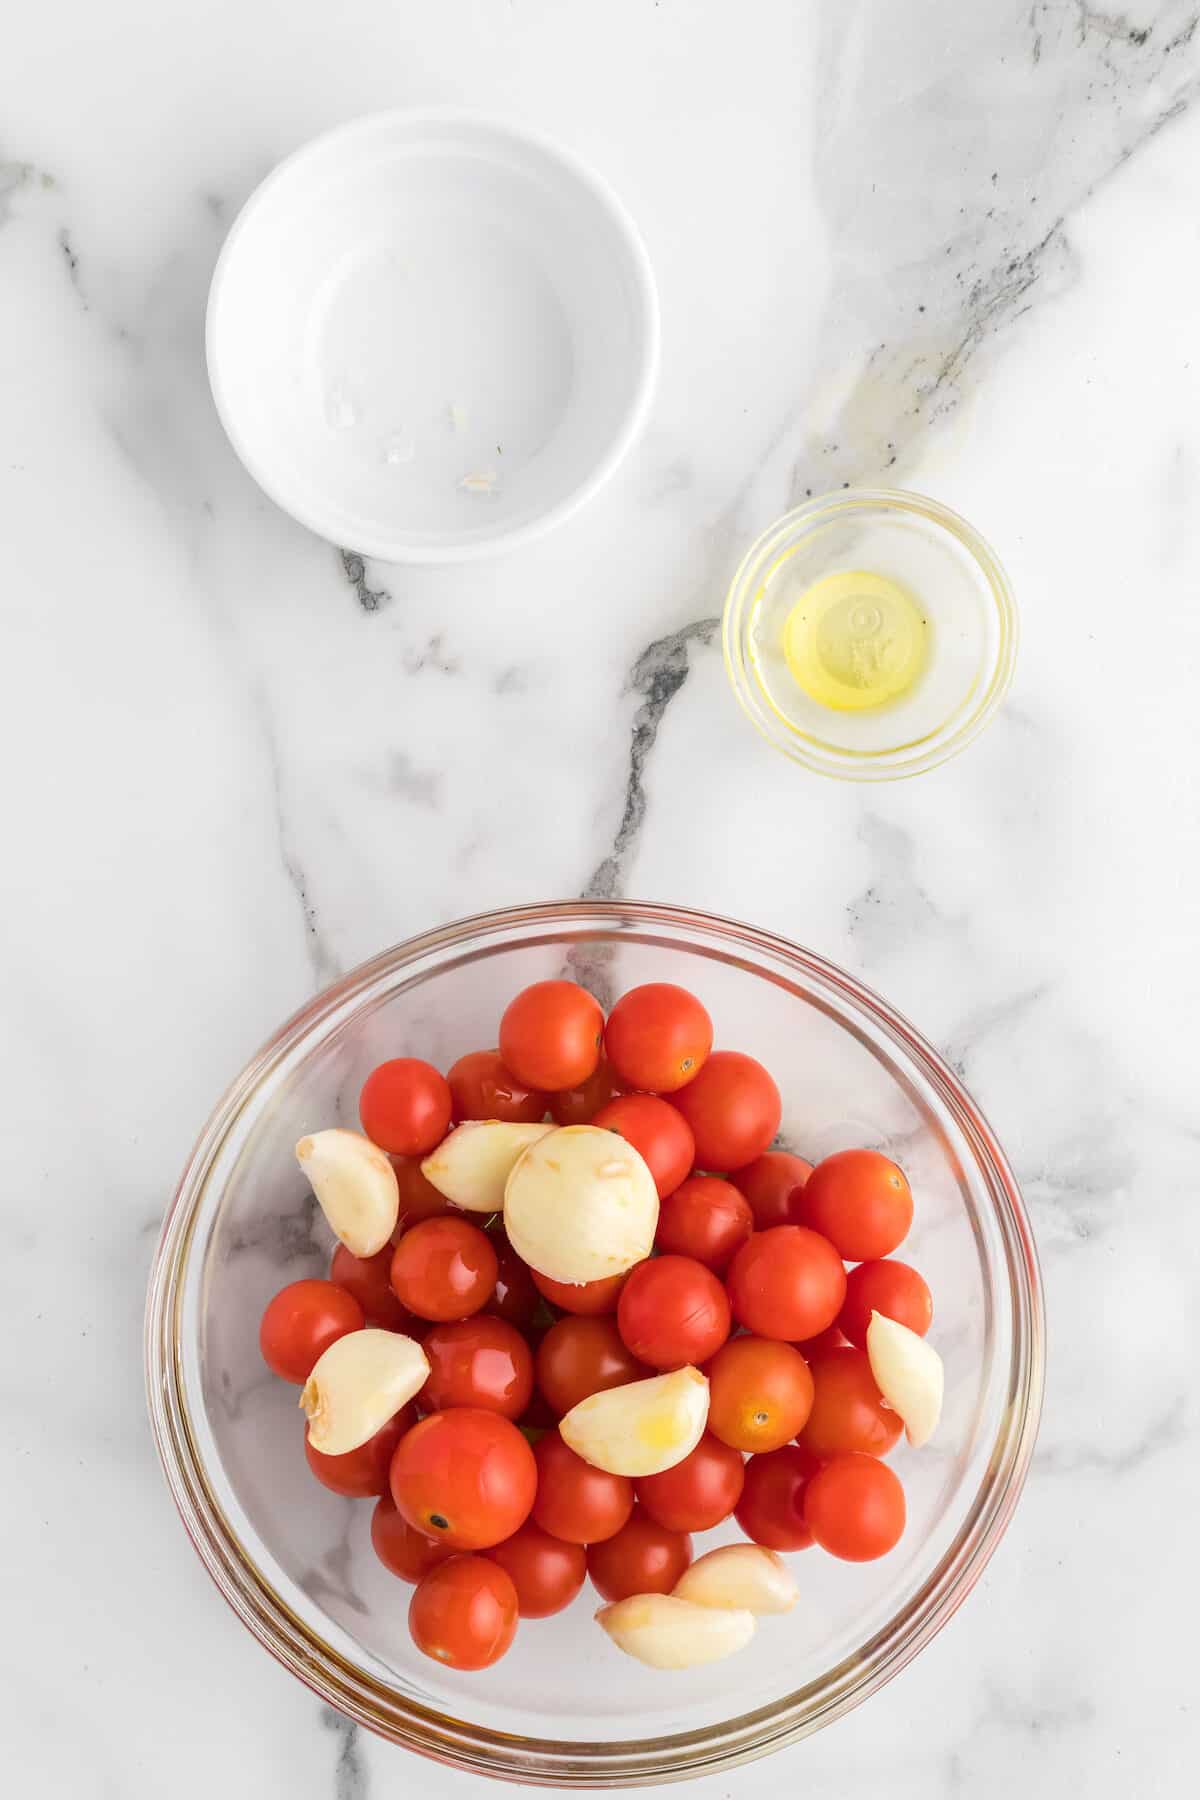 large bowl with cherry tomatoes and garlic cloves.